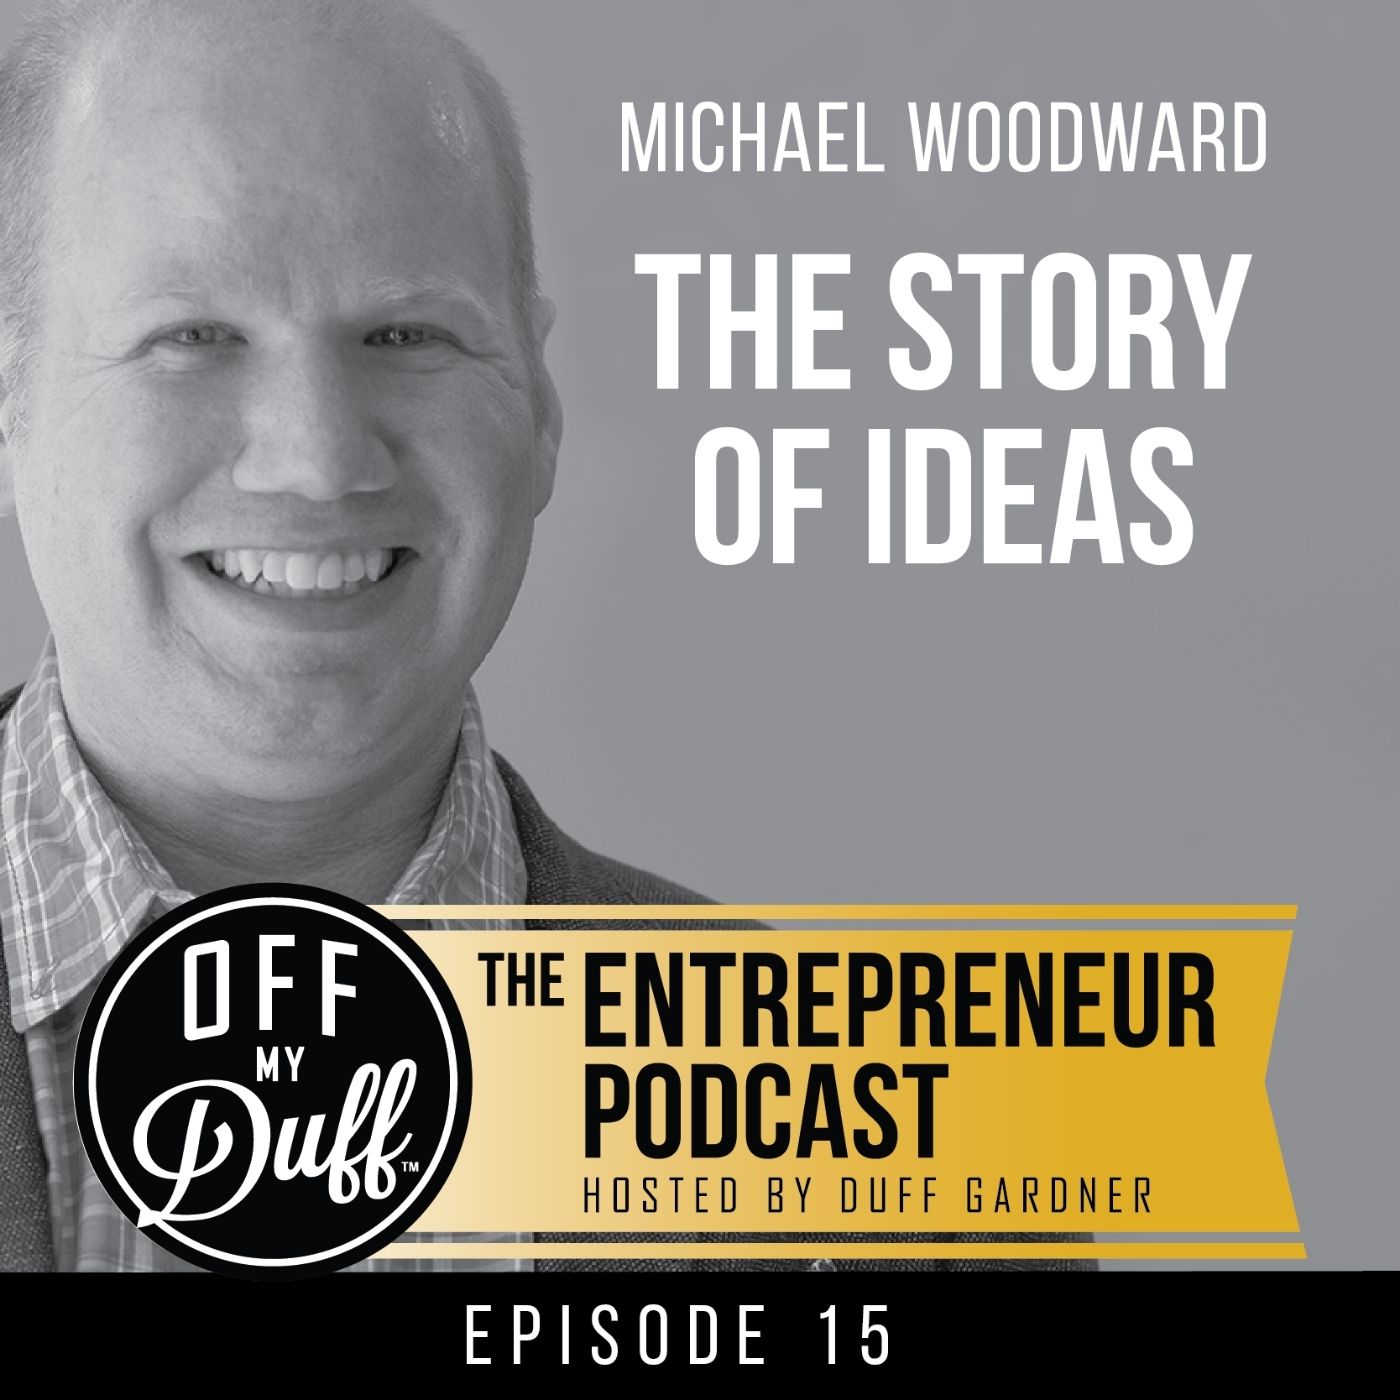 Michael Woodward - The Story of Ideas